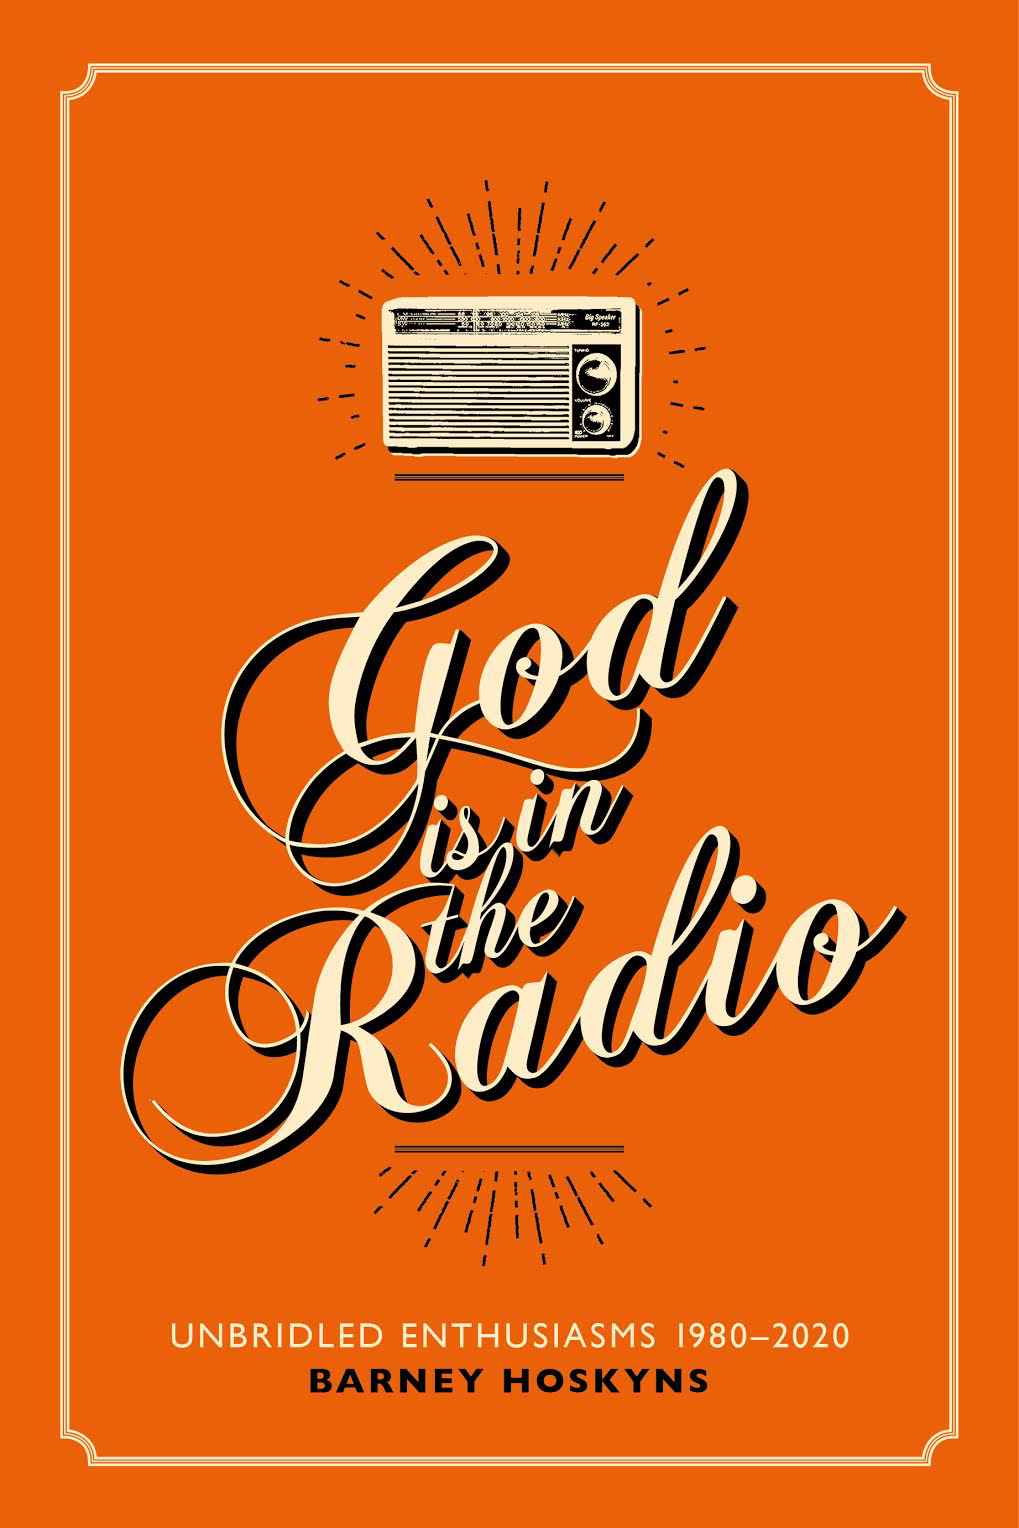 God Is In The Radio